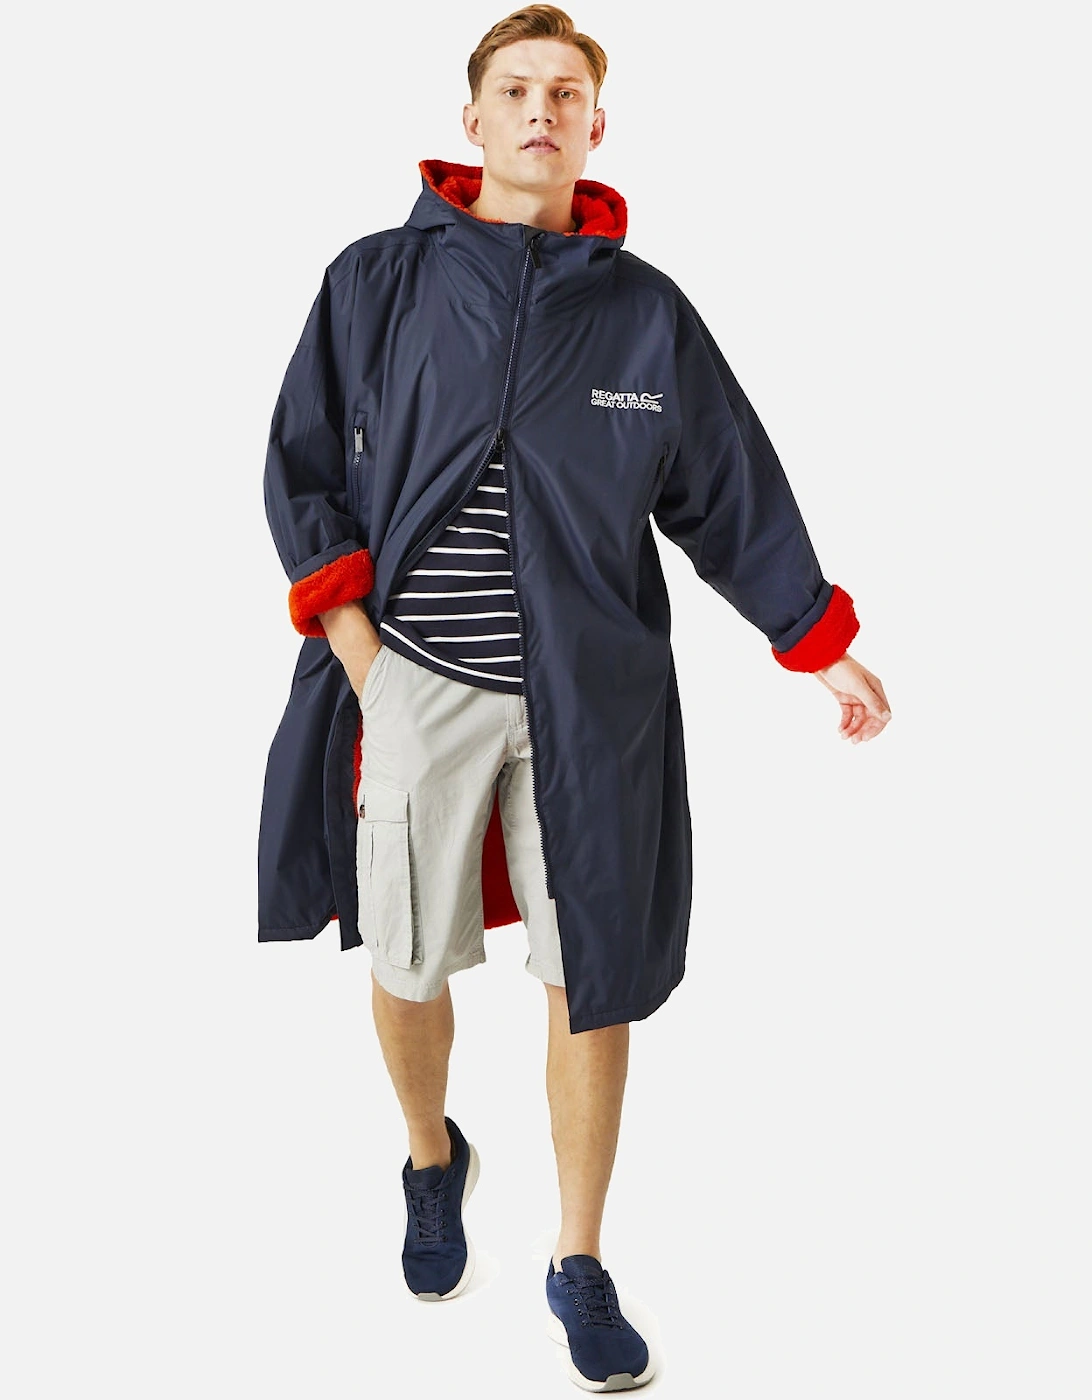 Outdoor Active Adults Waterproof Changing Robe